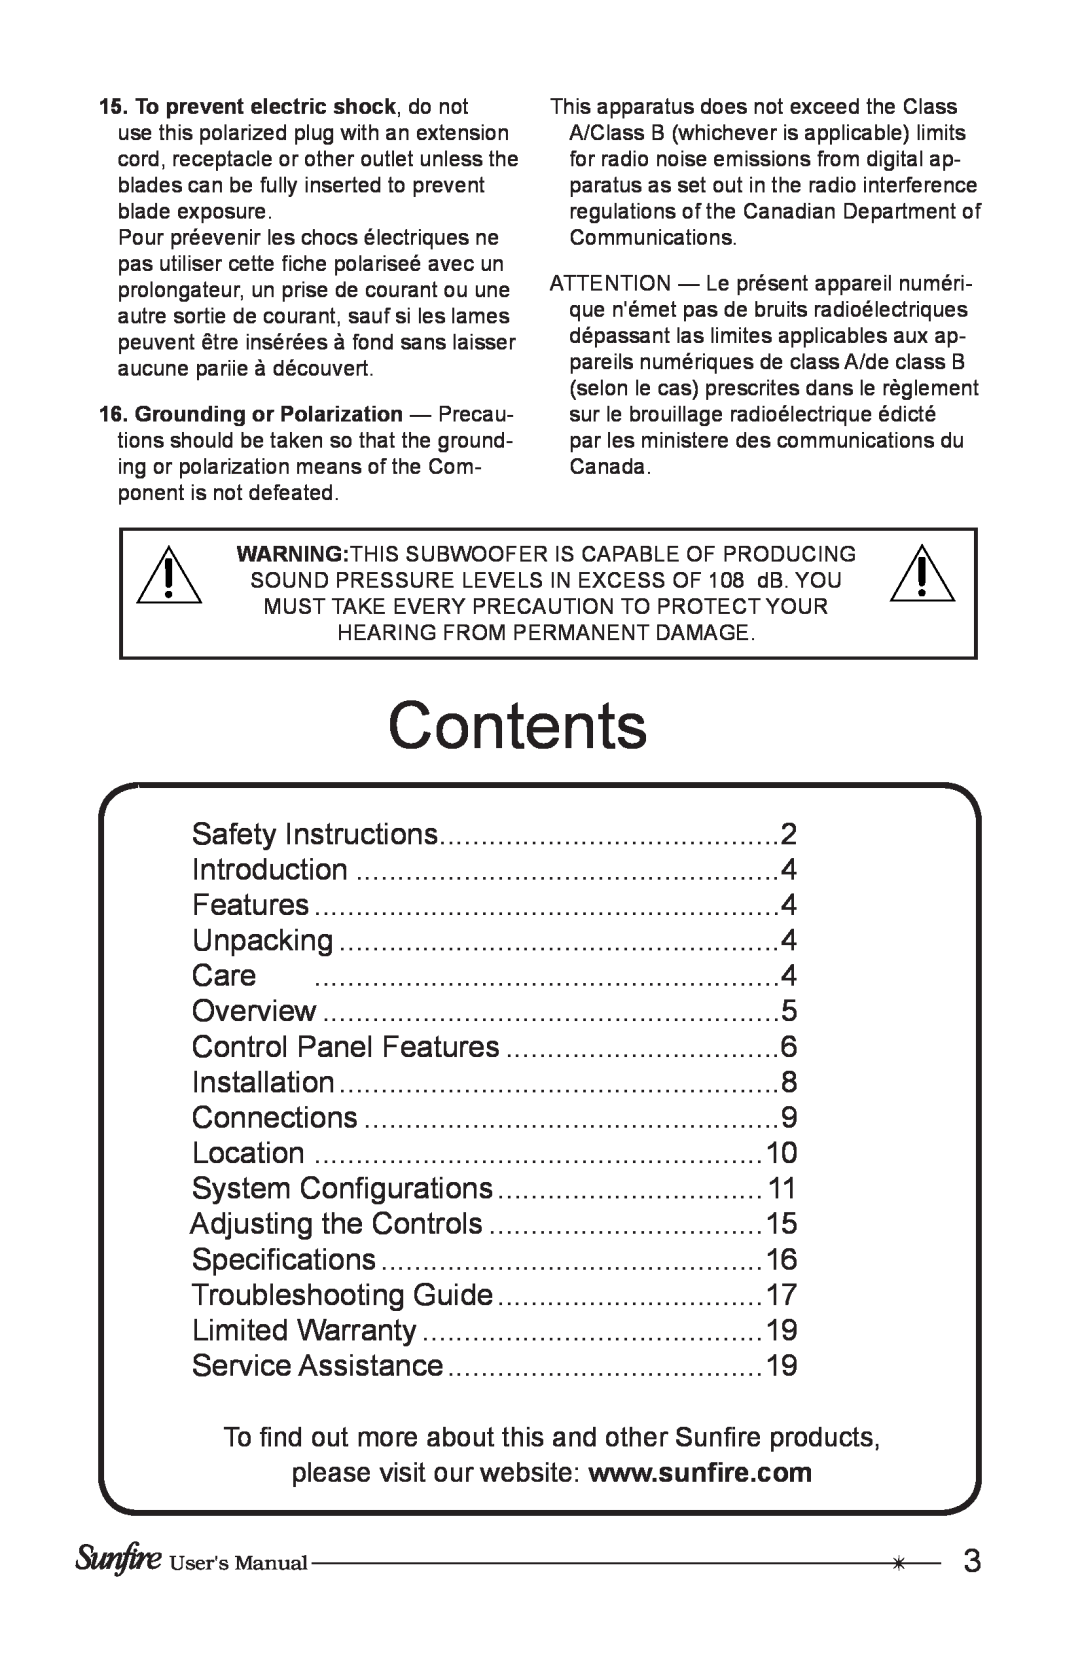 Sunfire Home Theater System manual Contents 